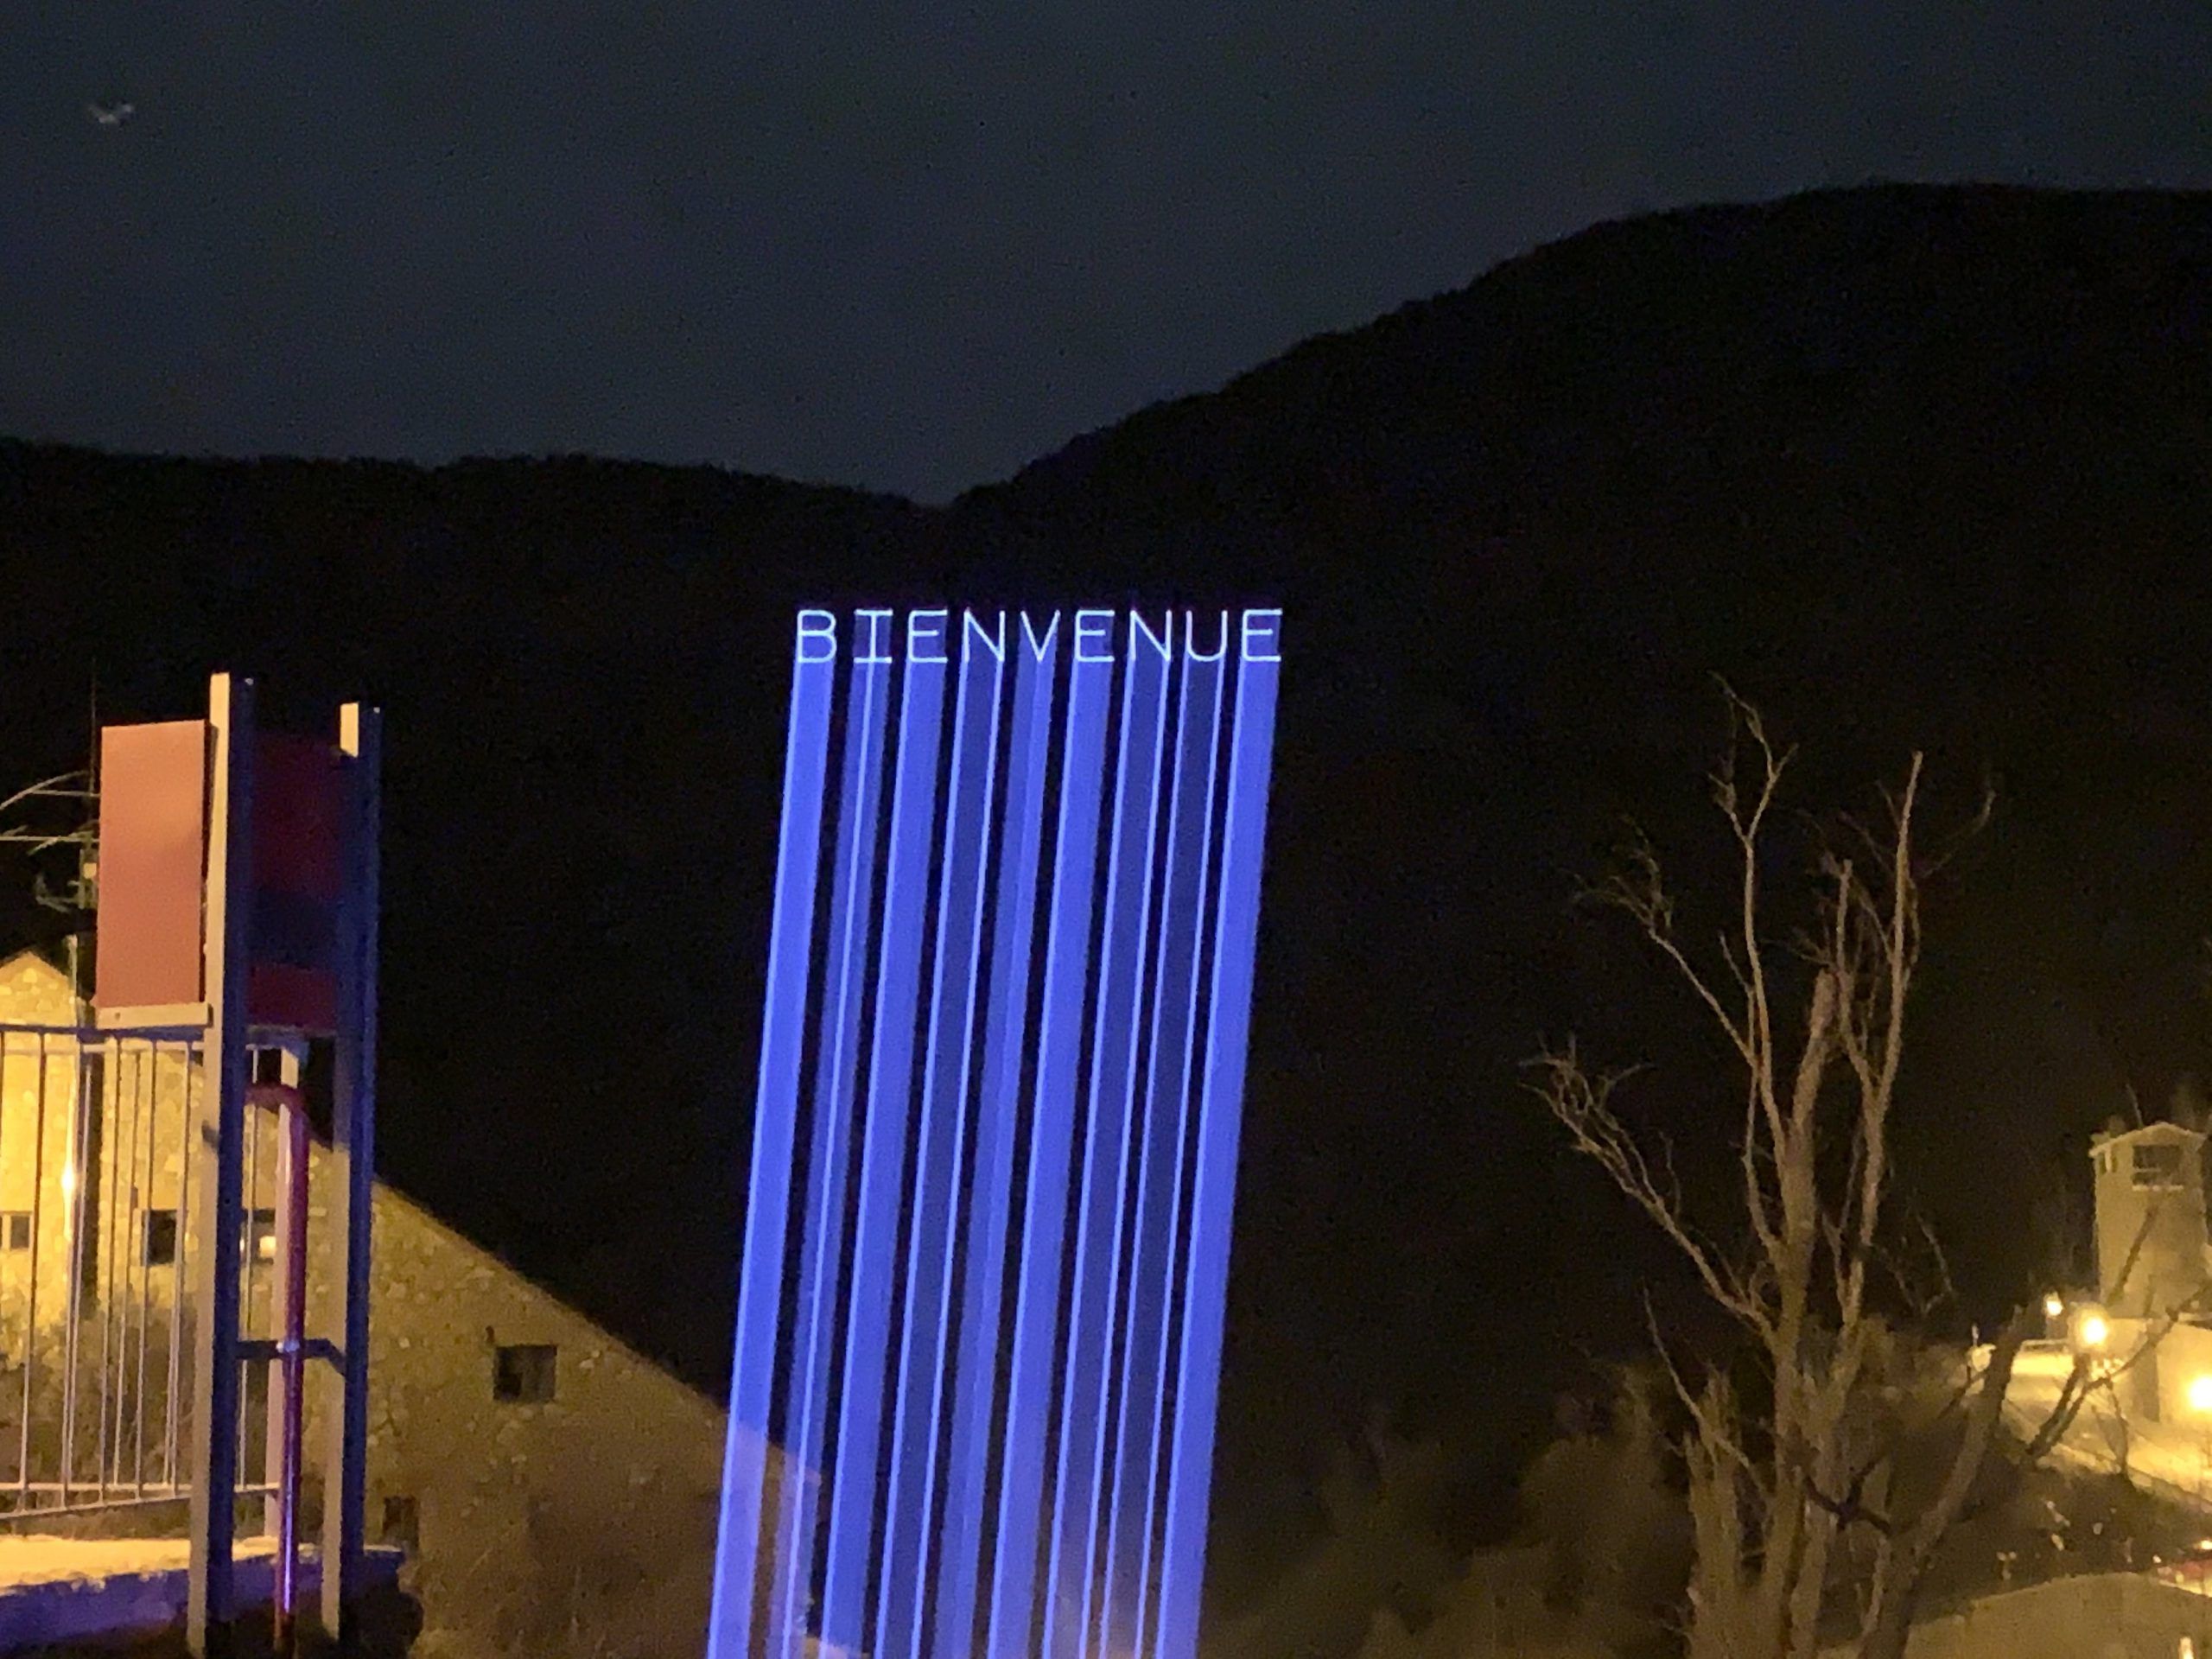 Europe Évènement - Photo of a mountain with the welcome word projected onto it